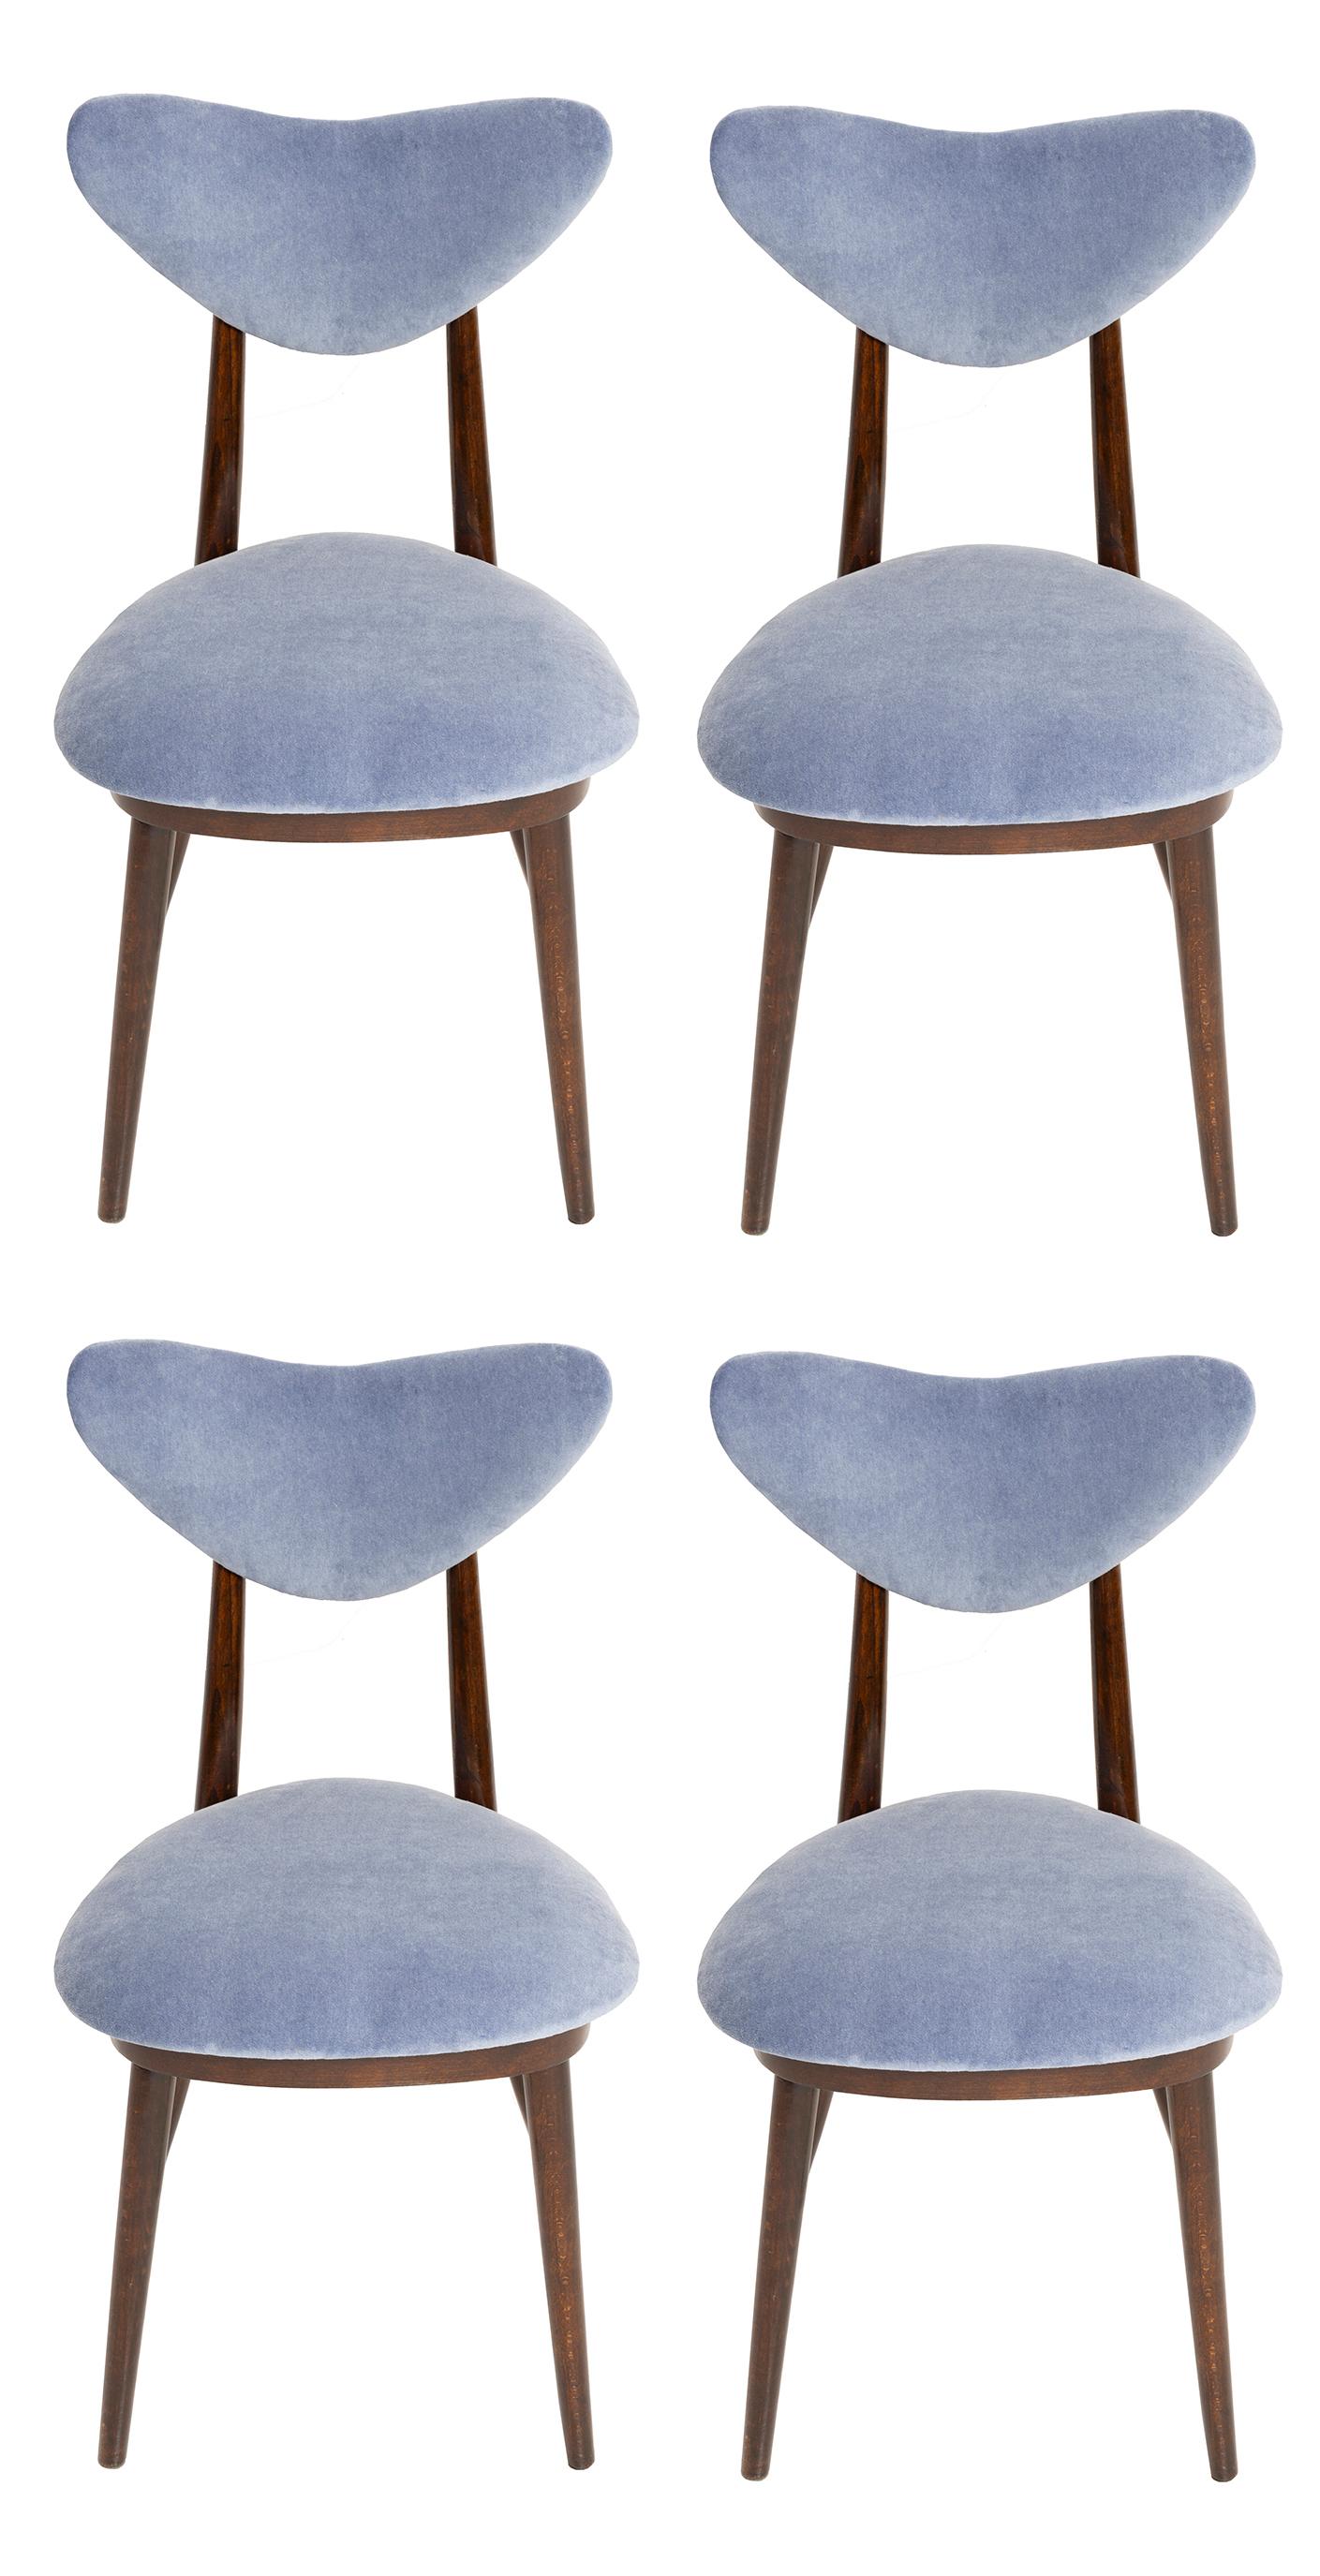 Set of Four Mid Century Violet Blue Cotton-Velvet Heart Chairs, Europe, 1960s For Sale 3